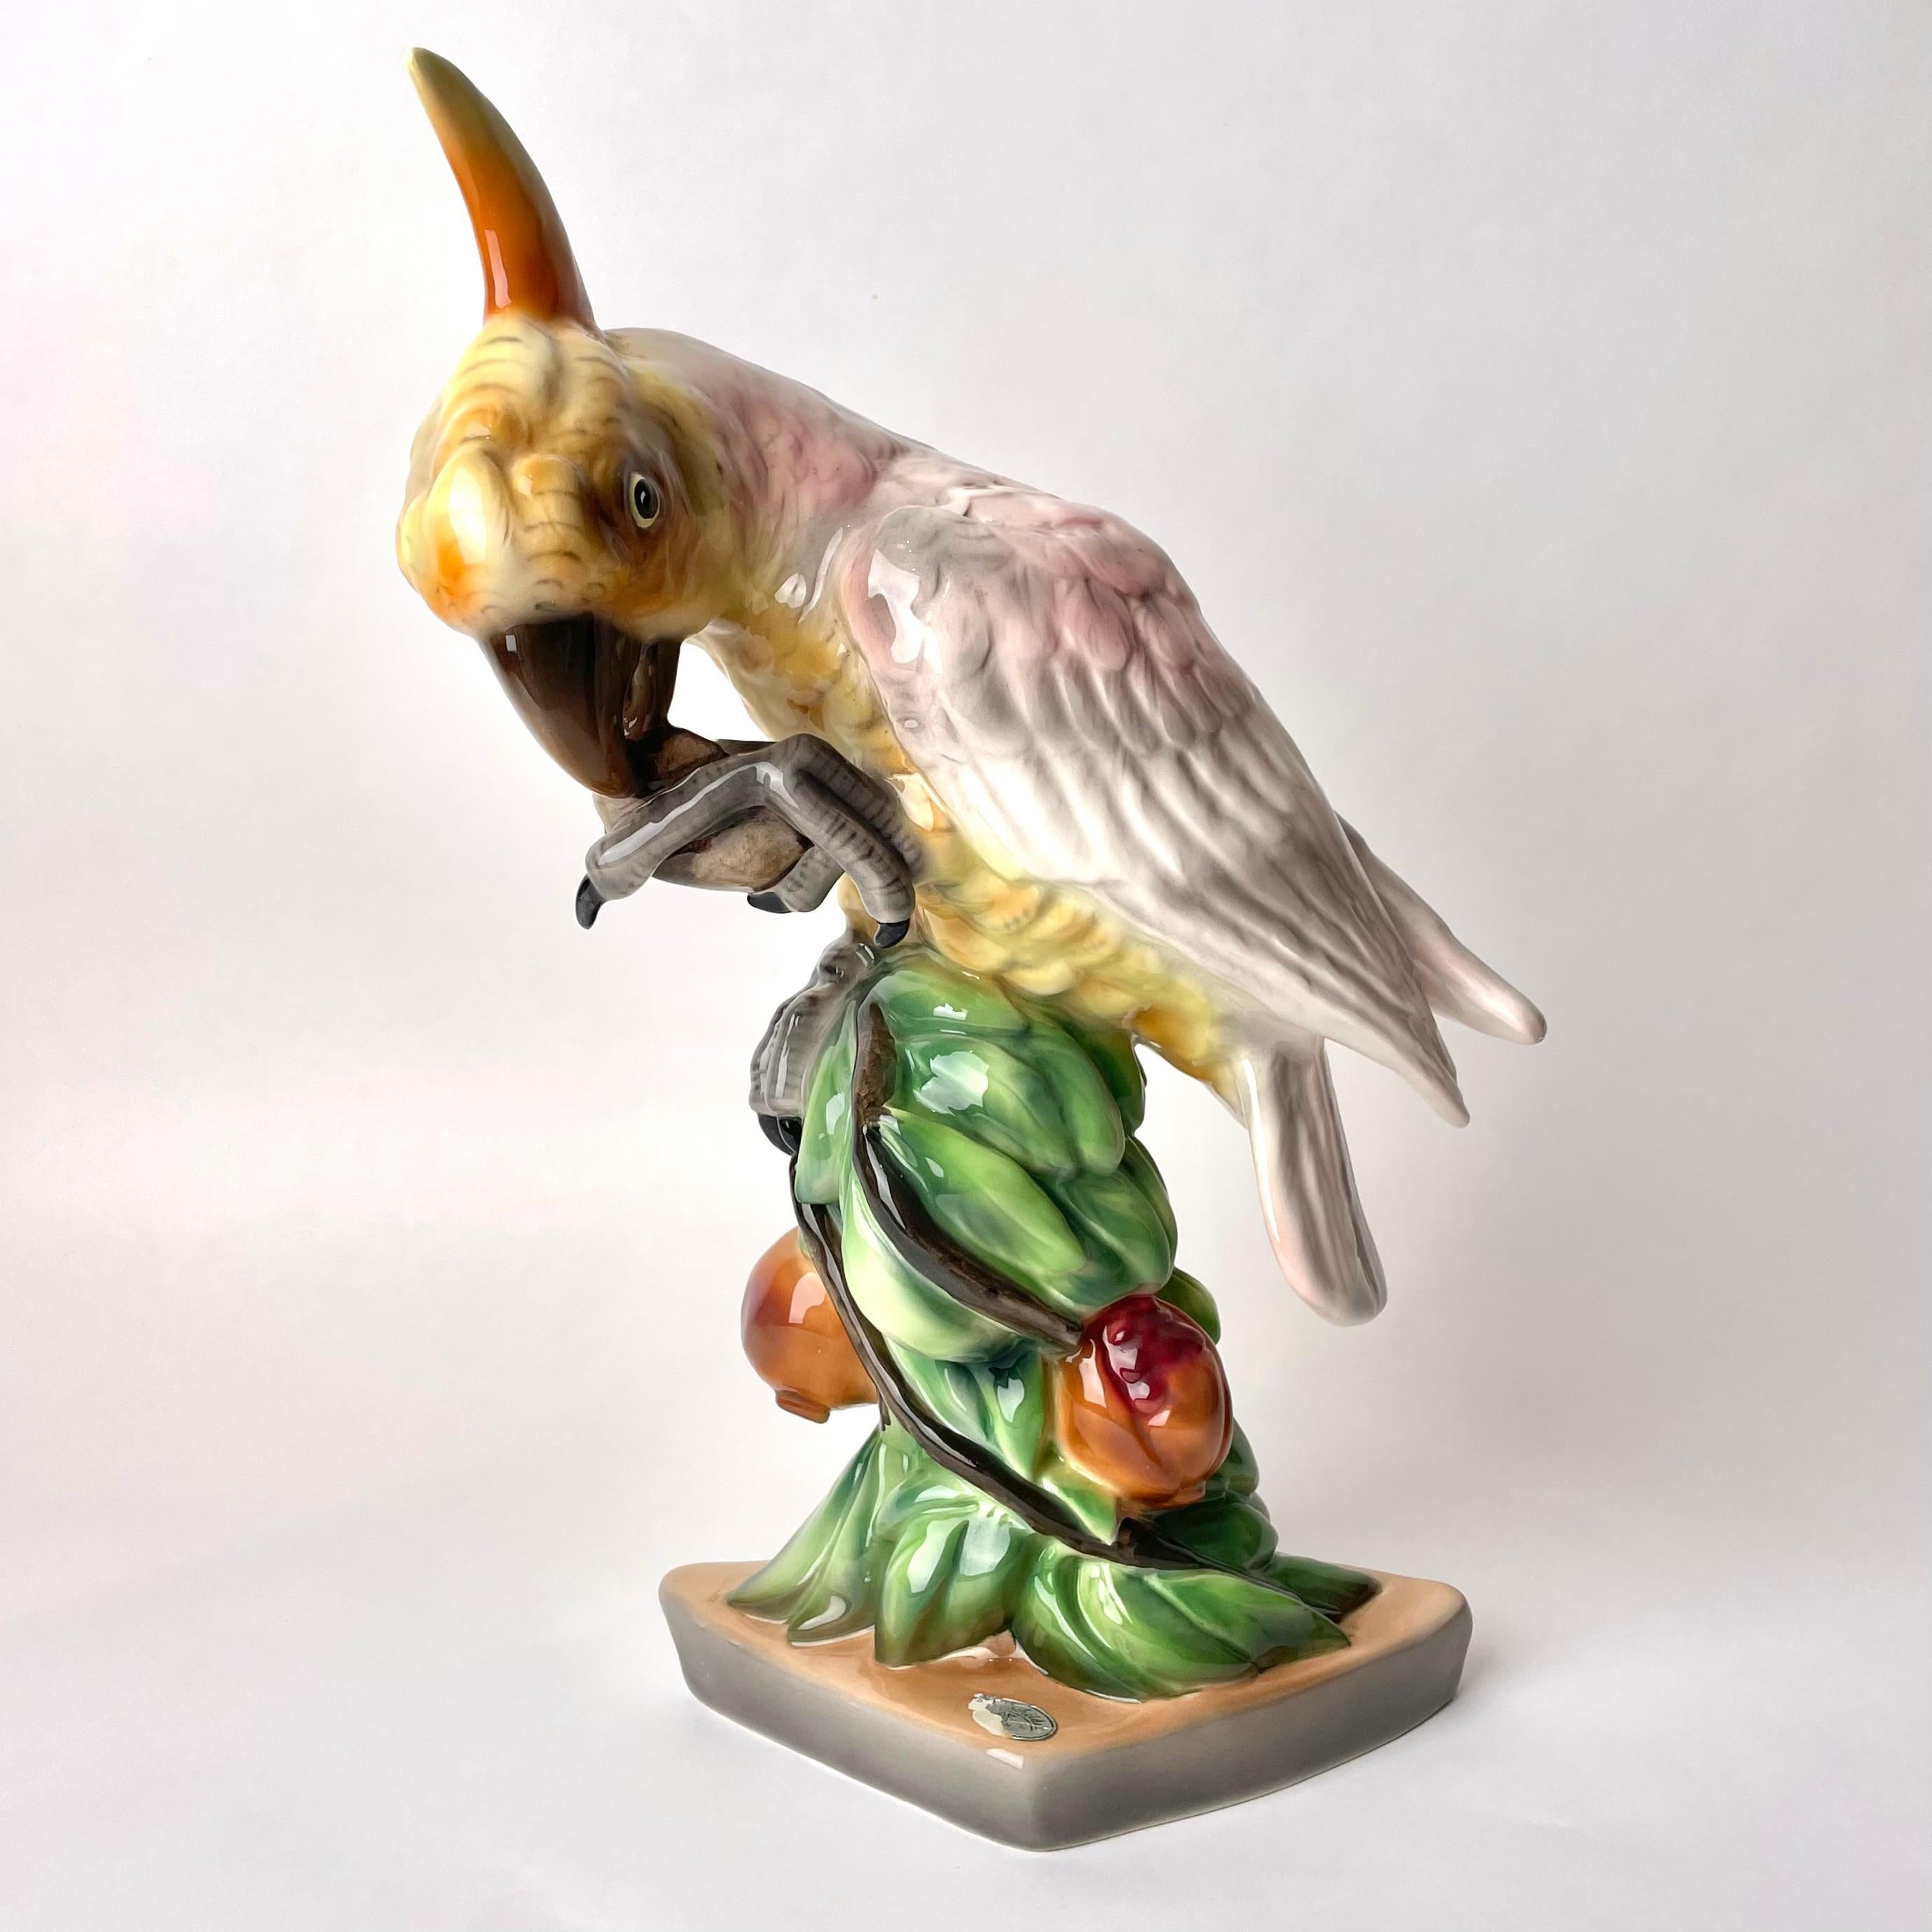 Viennese Porcelain Ceramic Figurine in shape of Parrot sitting on Branch with Apple, probably 1920s

This charming porcelain figurine was manufactured by prominent Viennese ceramic company Goldscheider. The company was one of the most influential